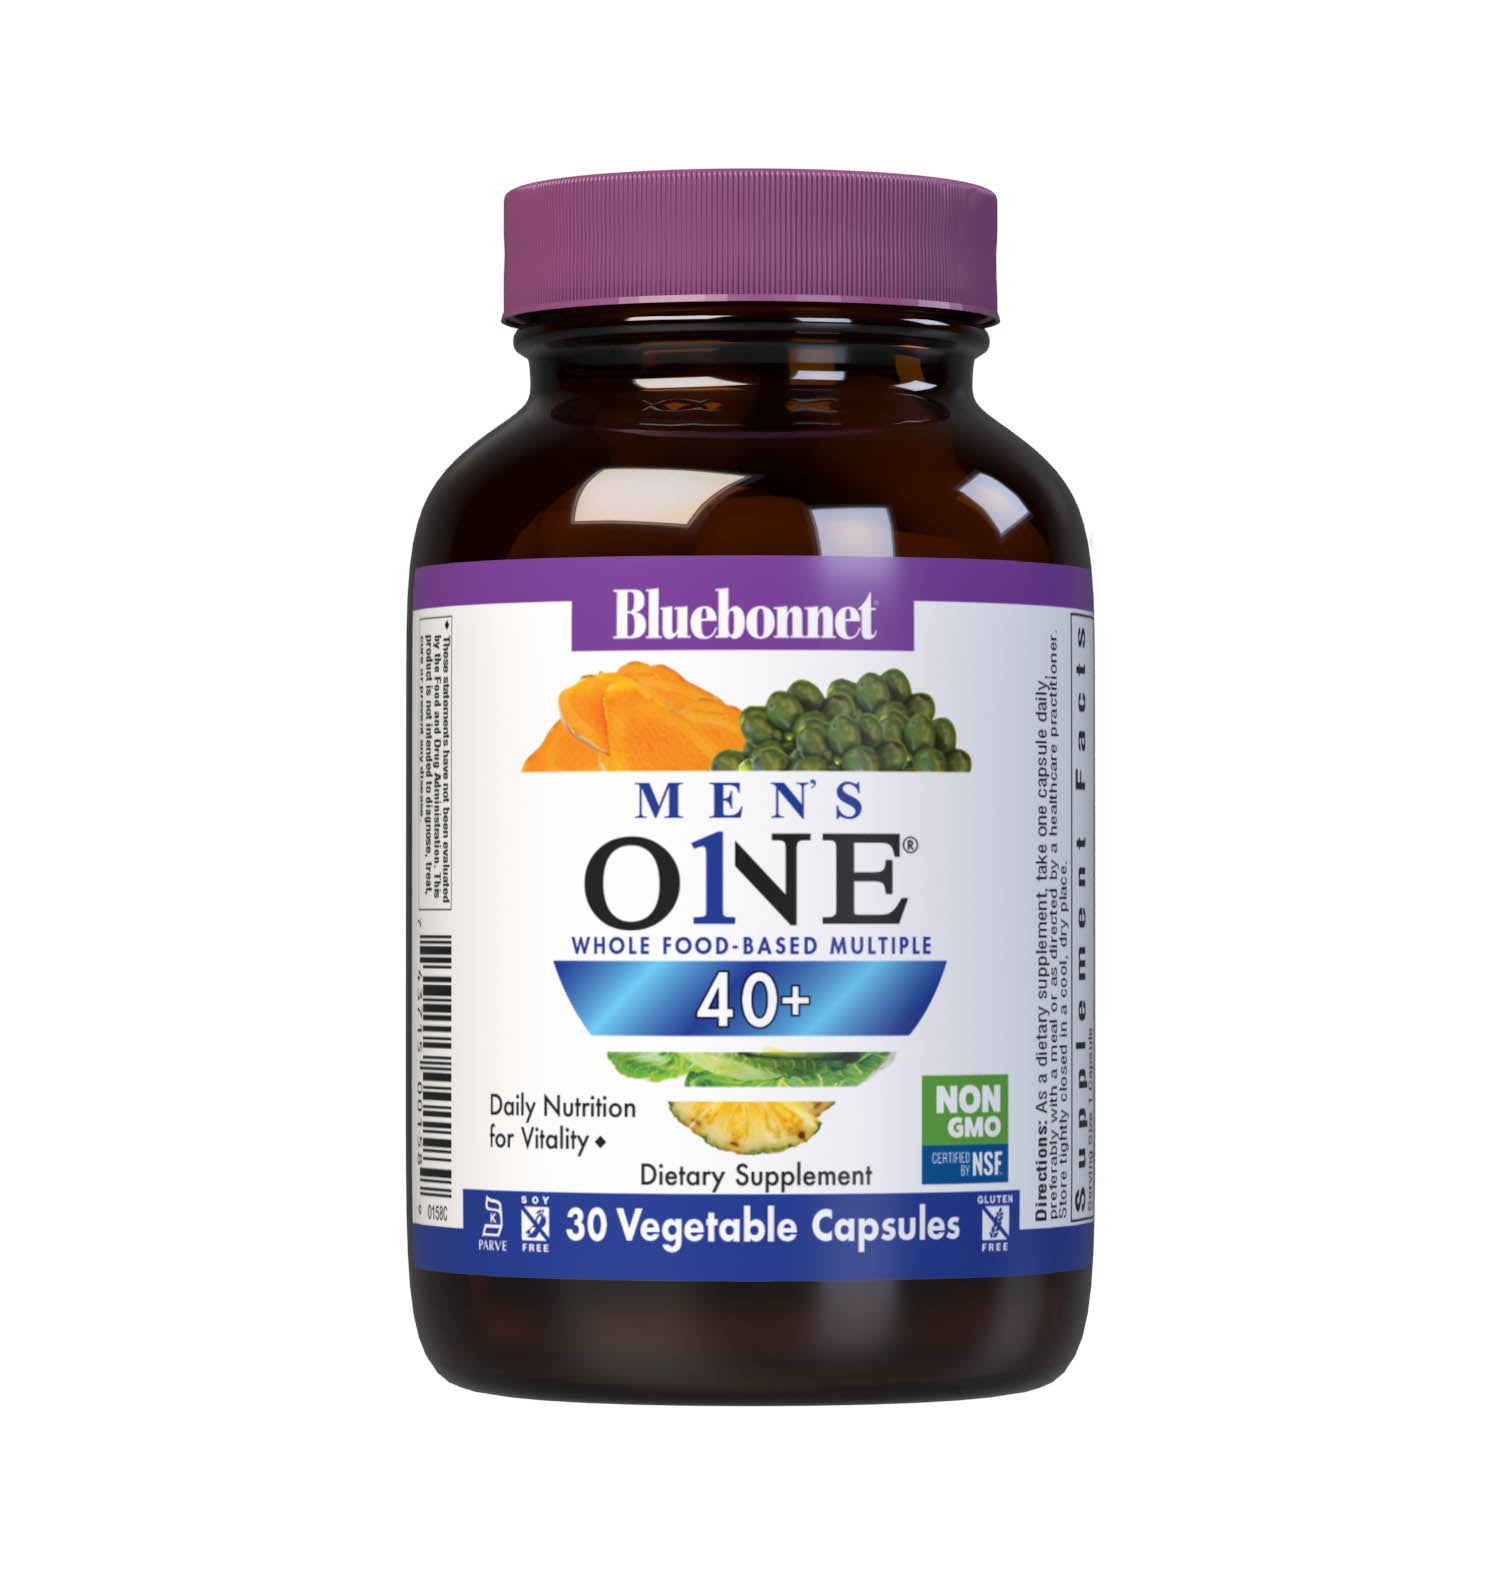 Bluebonnet’s Men’s ONE 40+ Whole Food-Based Multiple 30 Vegetable Capsules are formulated for daily nutritional support and vitality for men over 40, helping to increase energy and vitality, aid joint comfort, maintain prostate health, and support heart health. #size_30 count